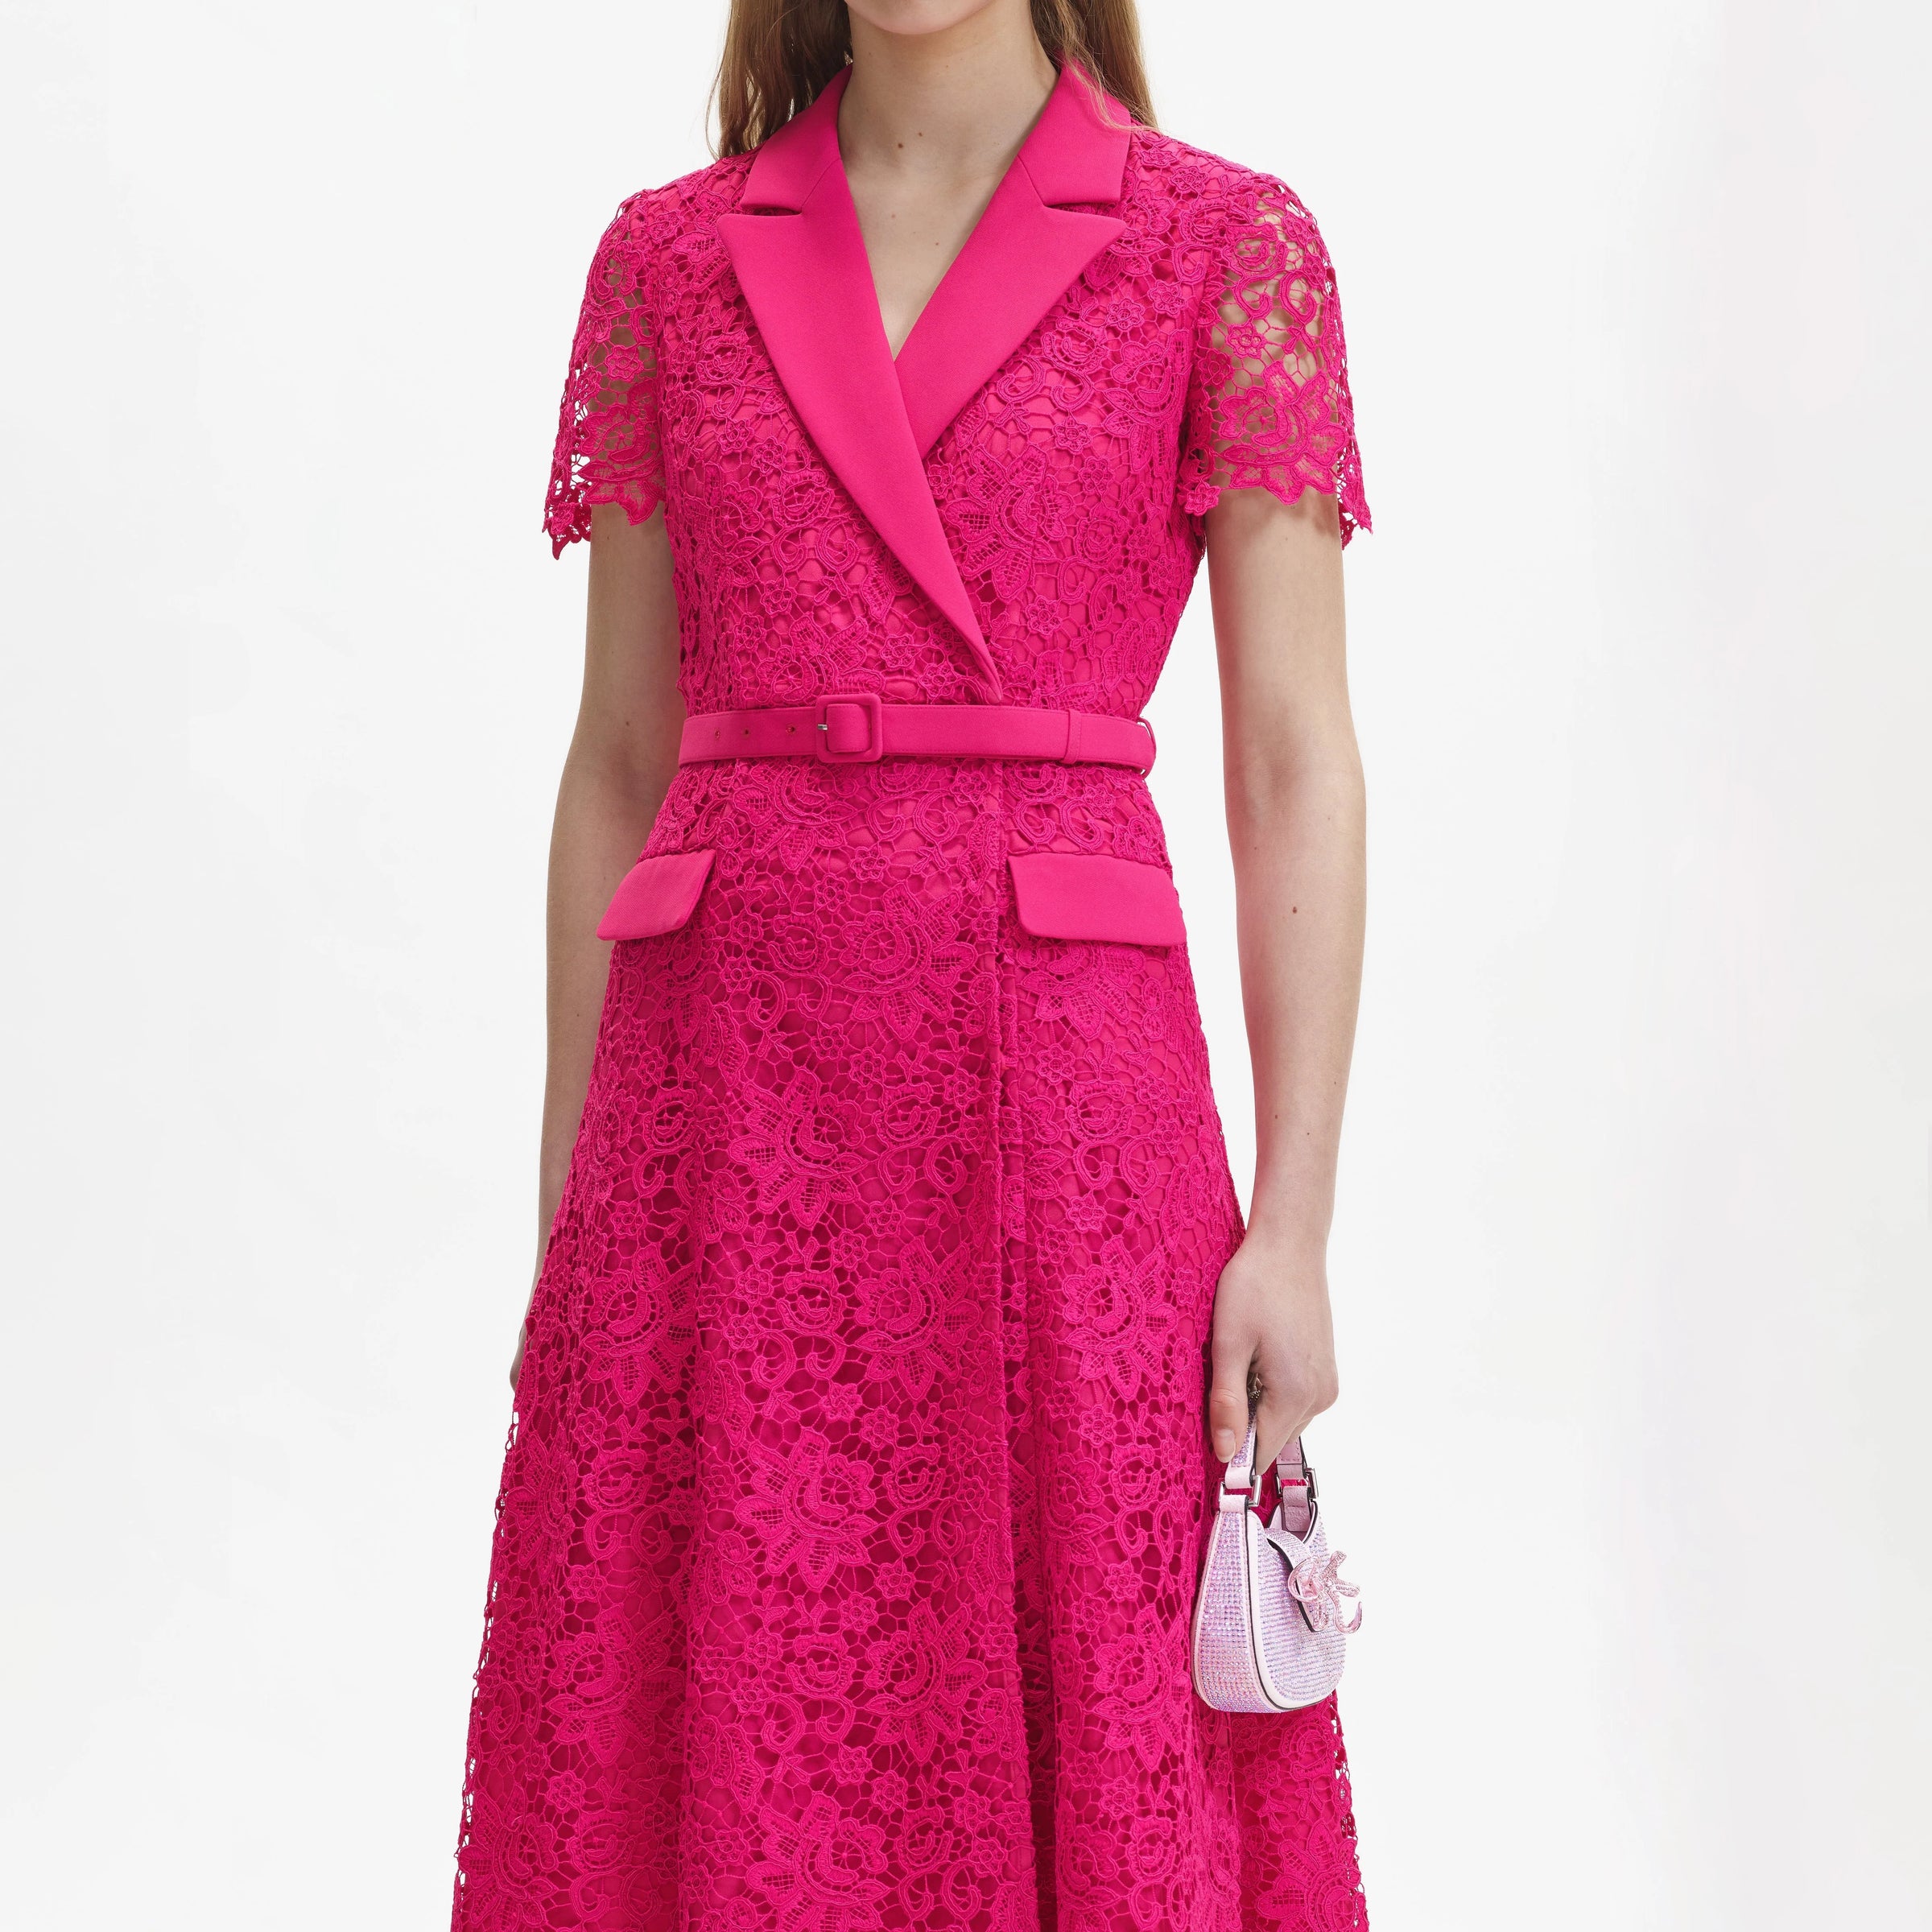 Hot pink lace wrap dress with short sleeves and a waist belt